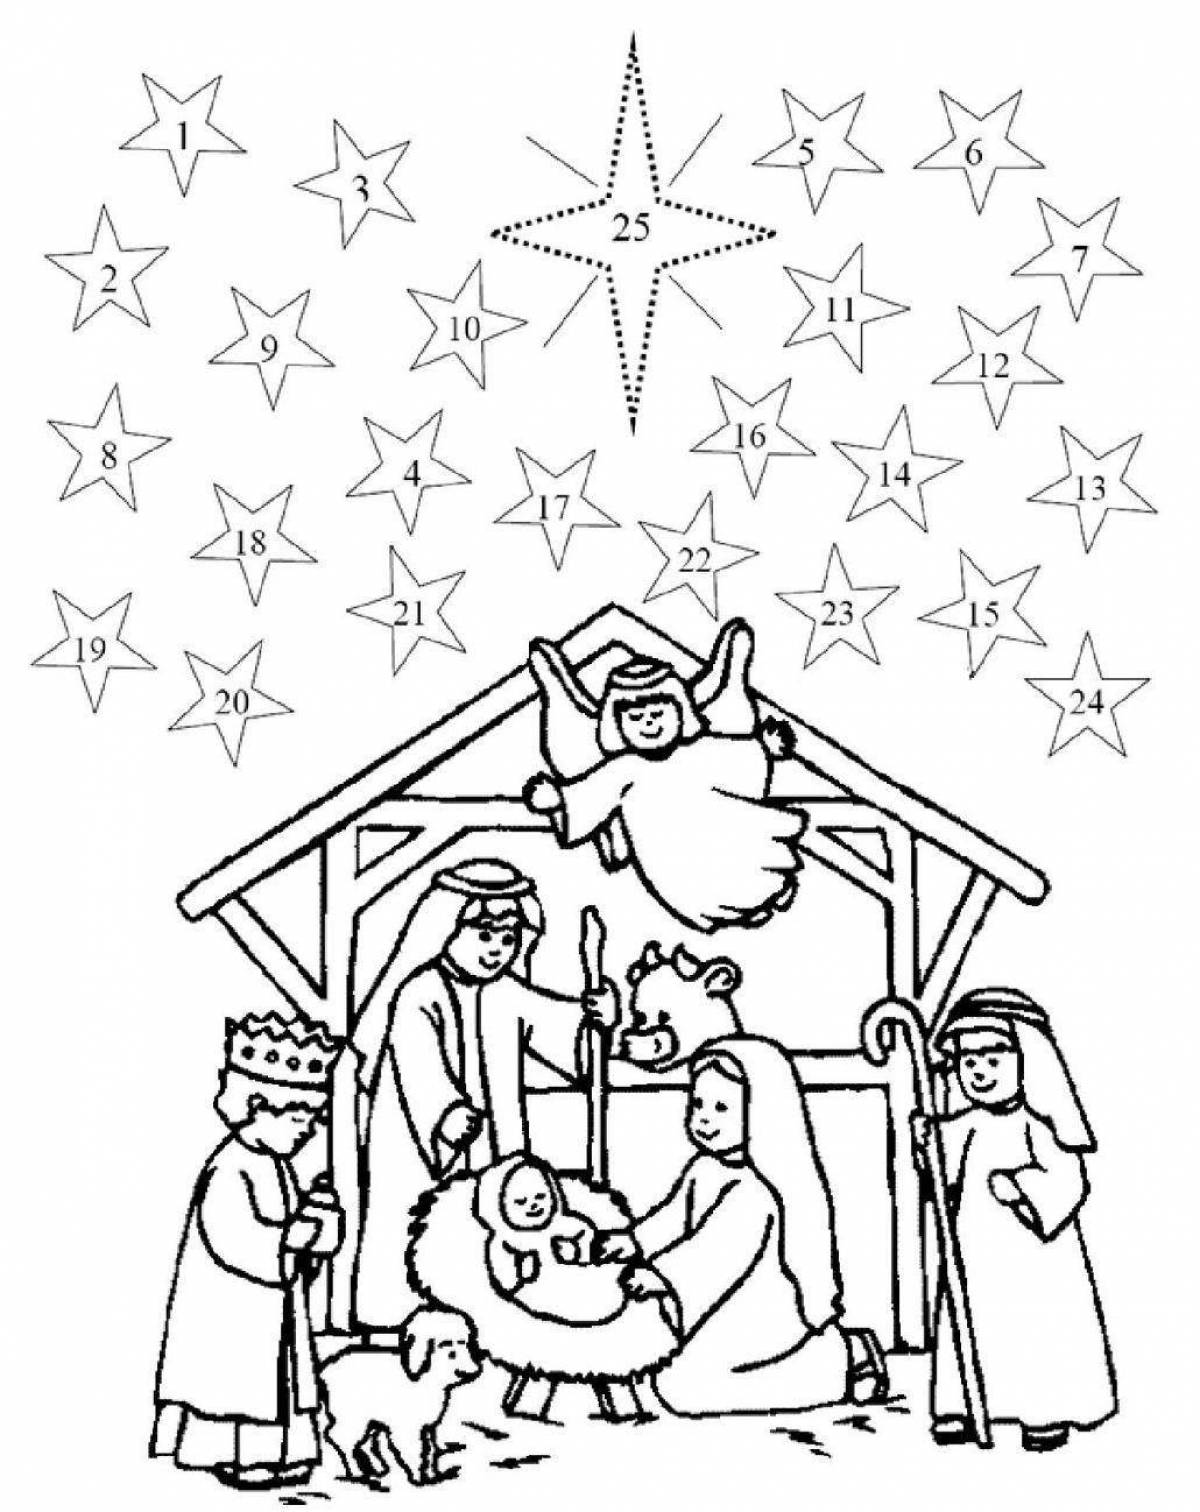 Color-explosion carol coloring page for children 6-7 years old